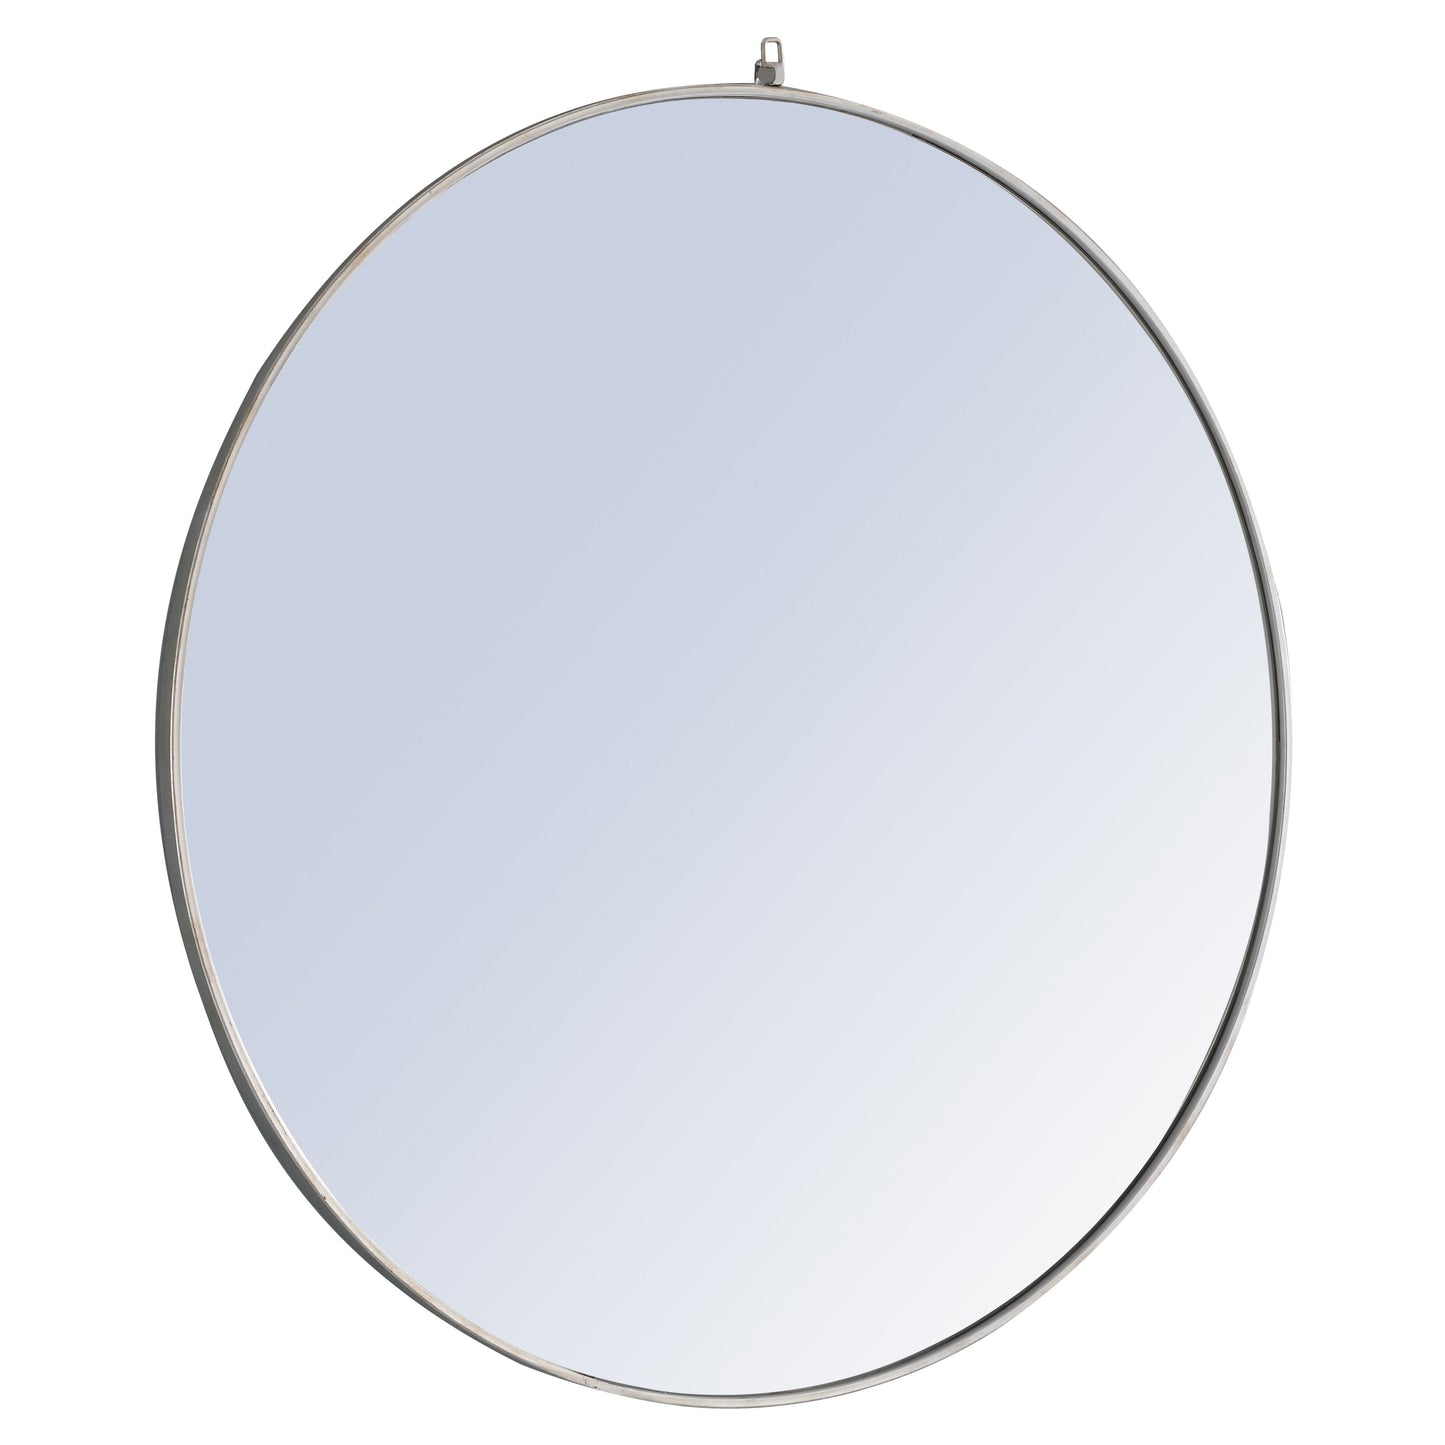 MR4069S Rowan 48" x 48" Metal Framed Round Mirror with Decorative Hook in Silver